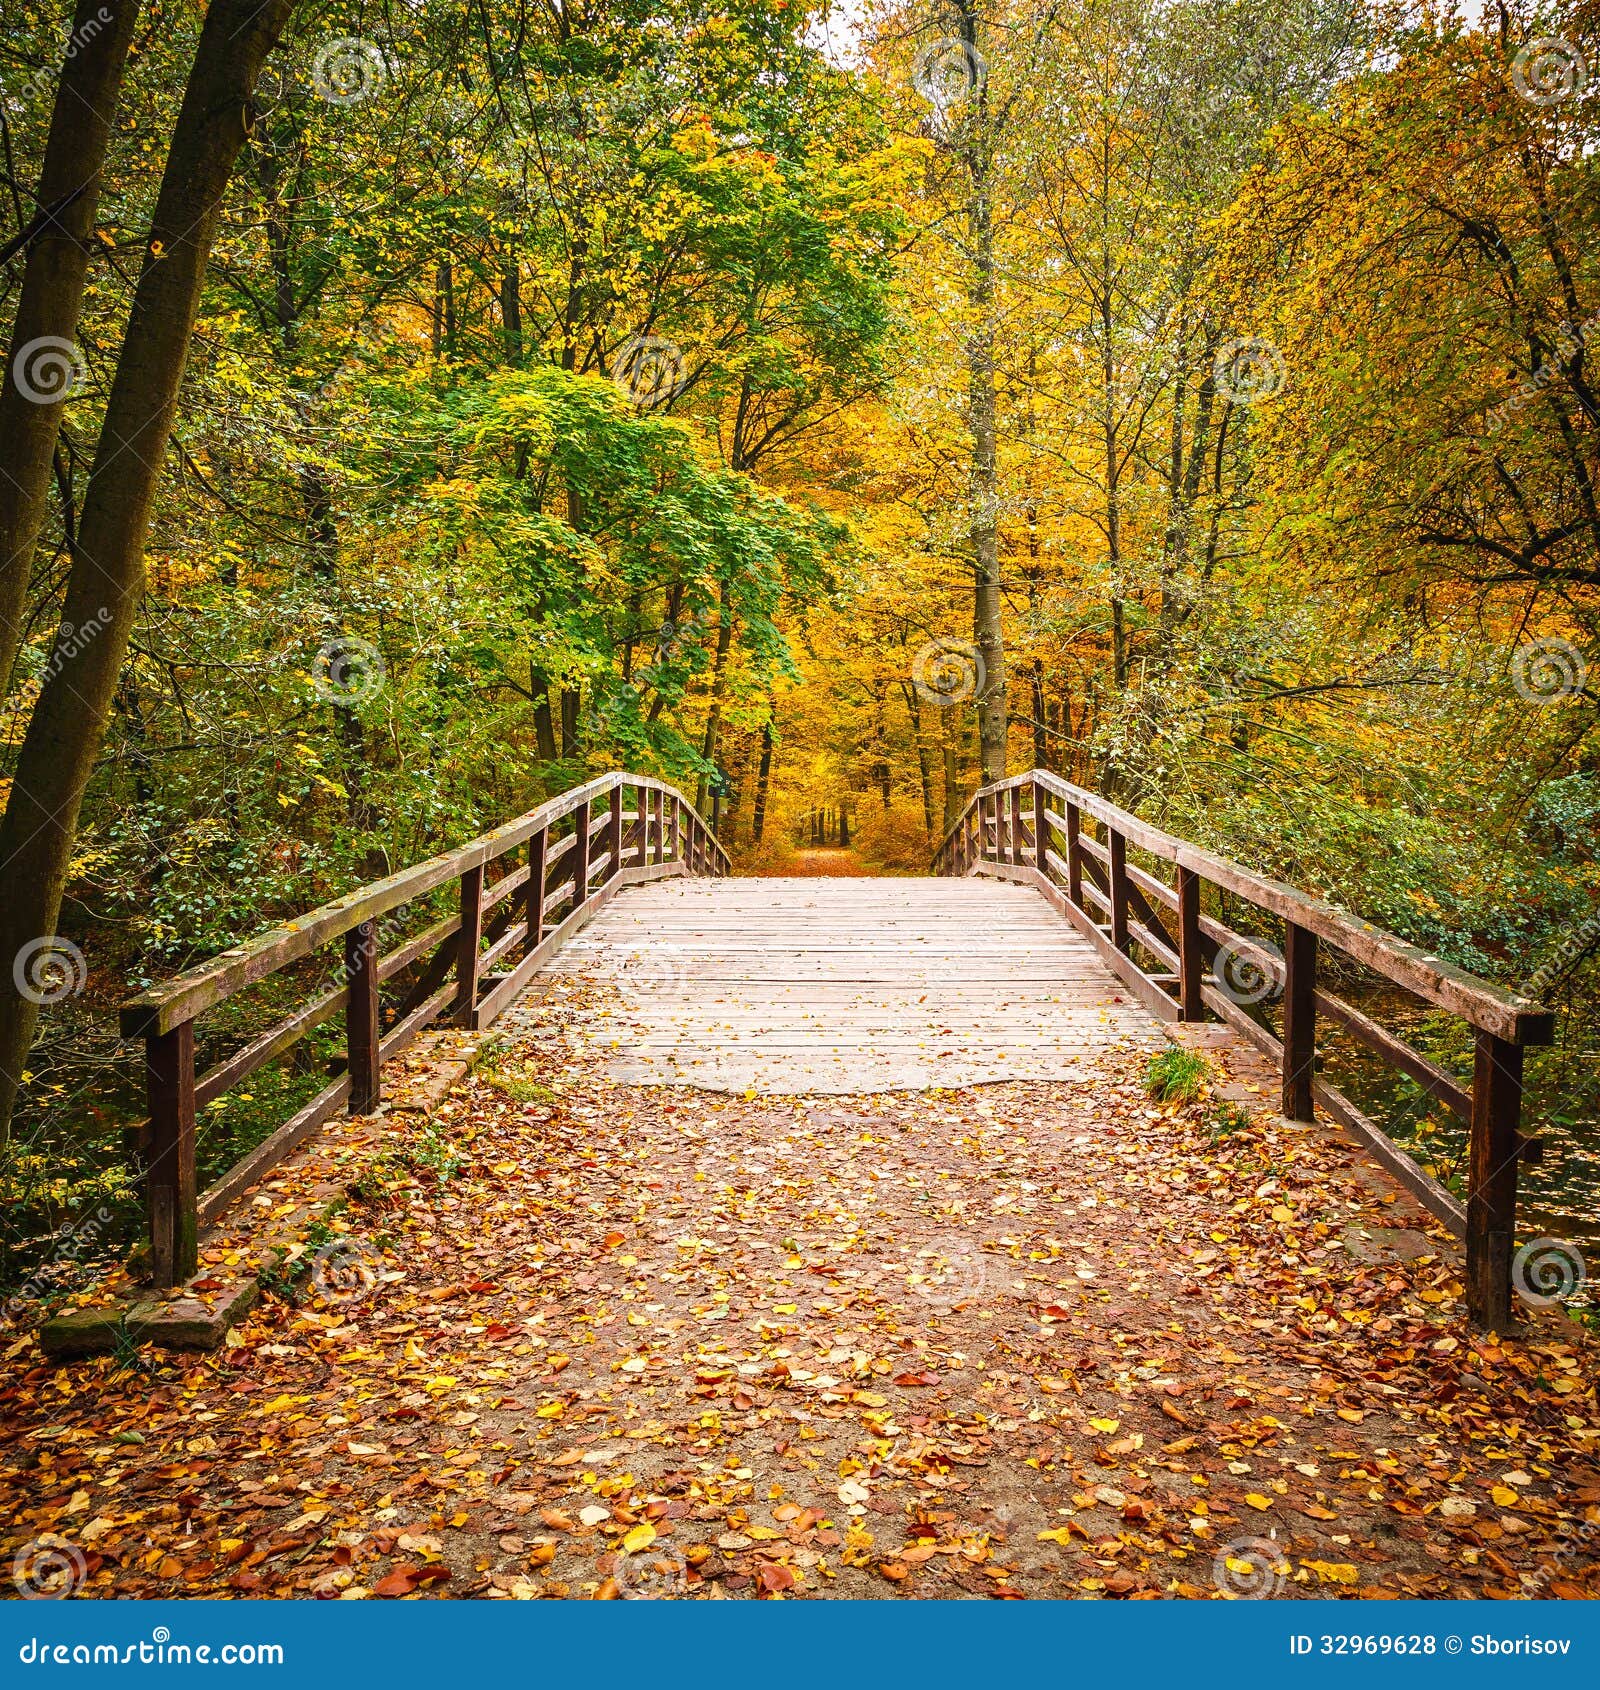 Bridge In Autumn Forest Stock Photo Image Of Natural 32969628